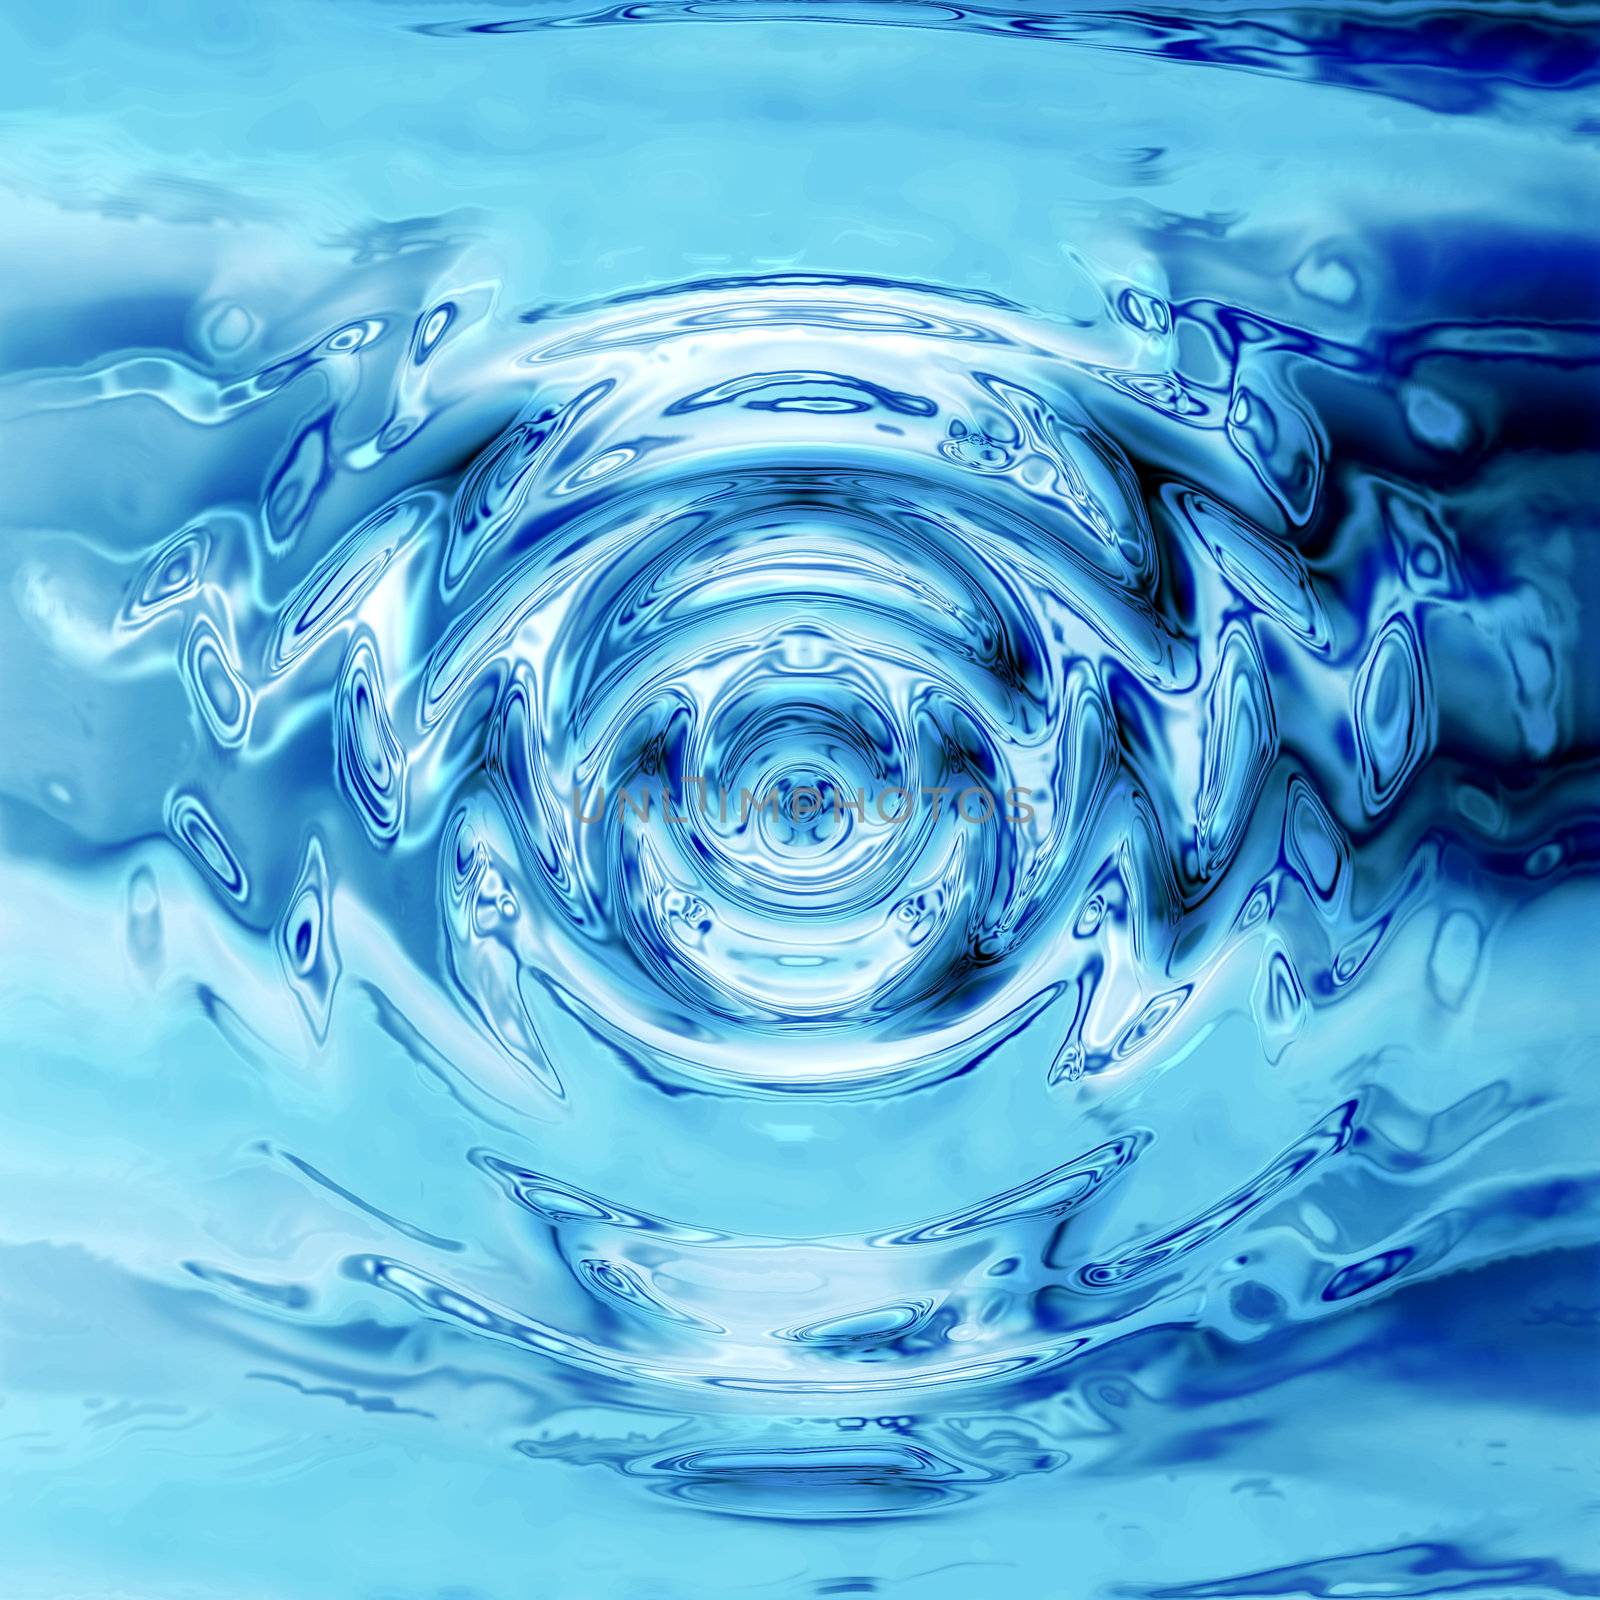 abstract water background by jonnysek